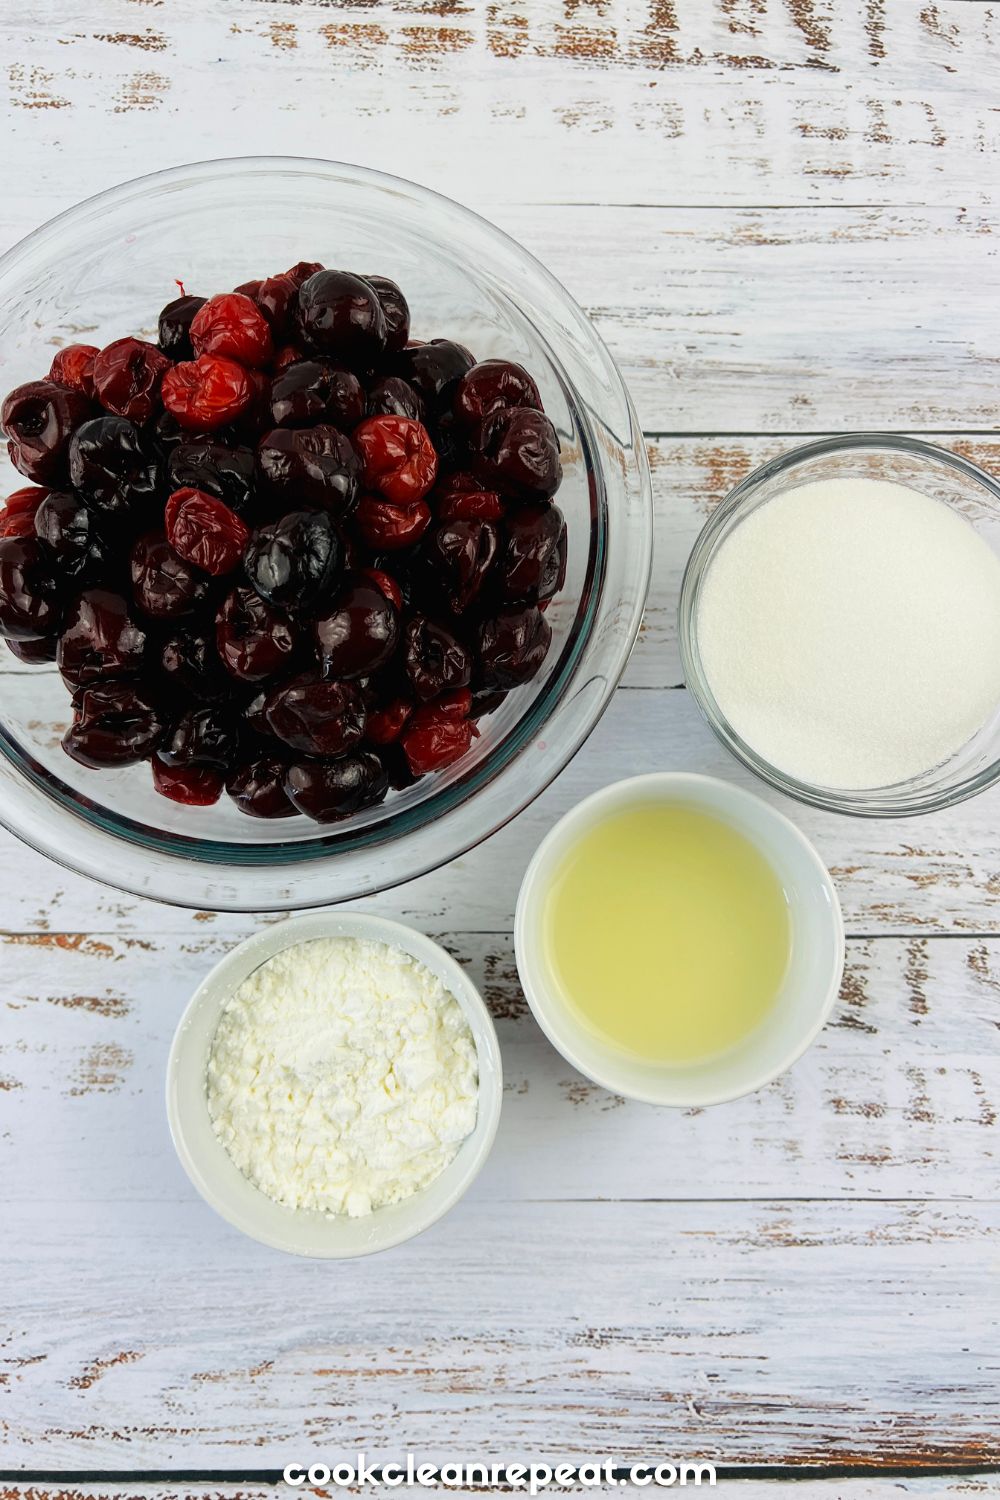 Ingredients needed for this cherry pie filling recipe